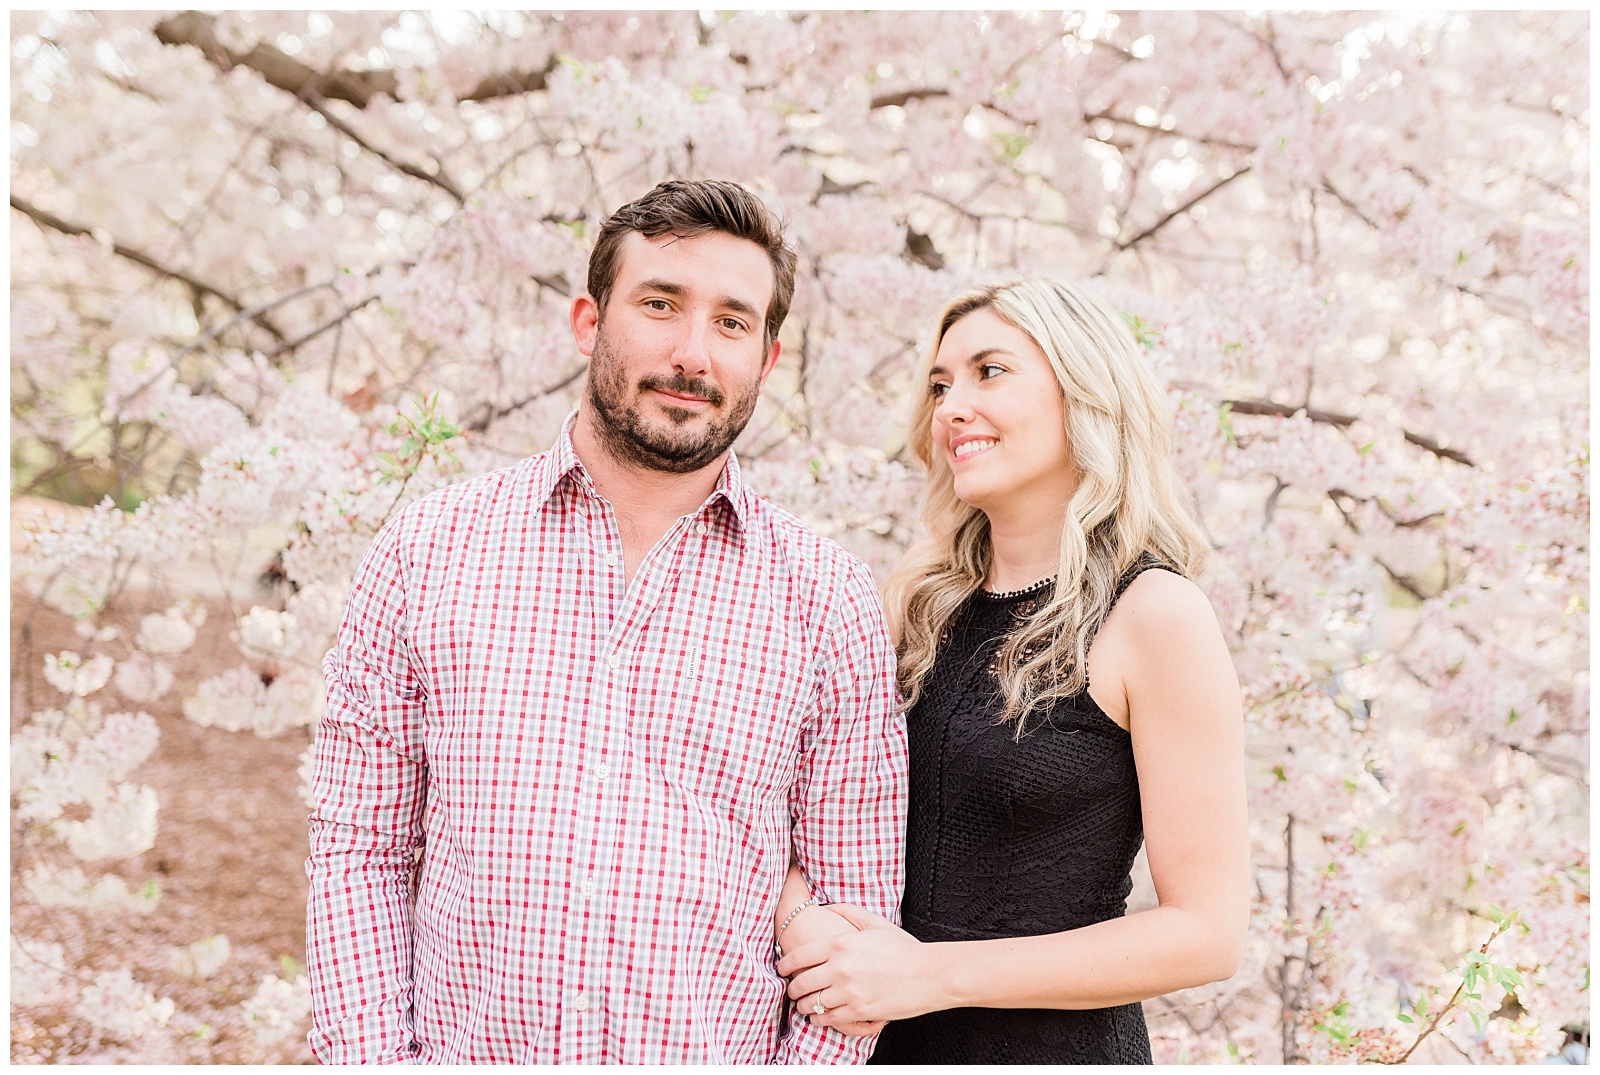 A woman looks at her fiance in front of a blooming cherry blossom tree in New York.